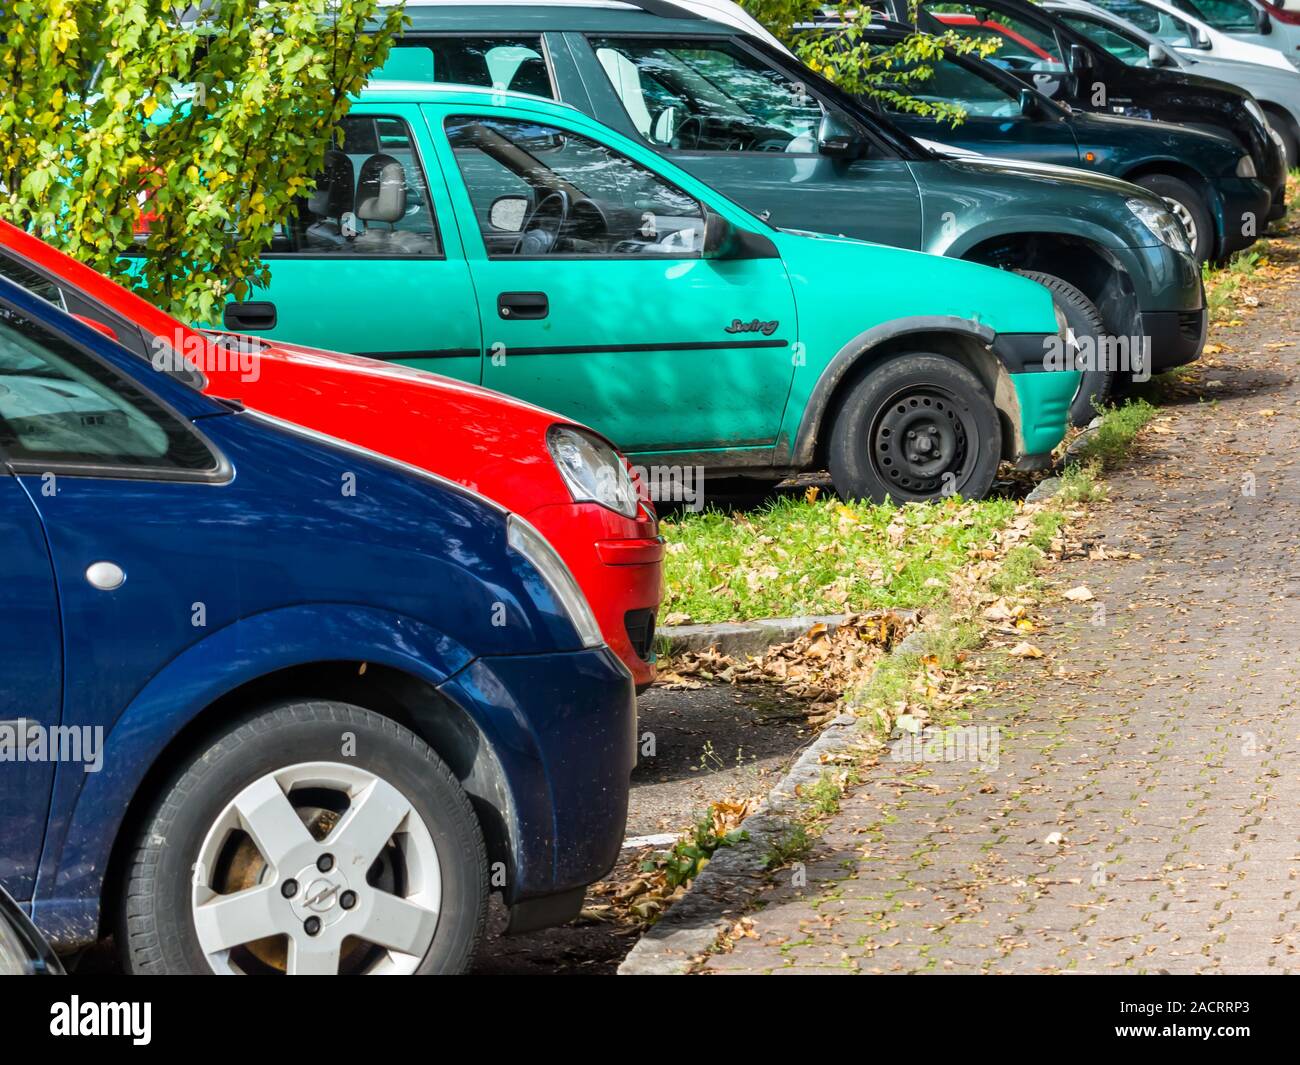 Cars in a parking lot Stock Photo